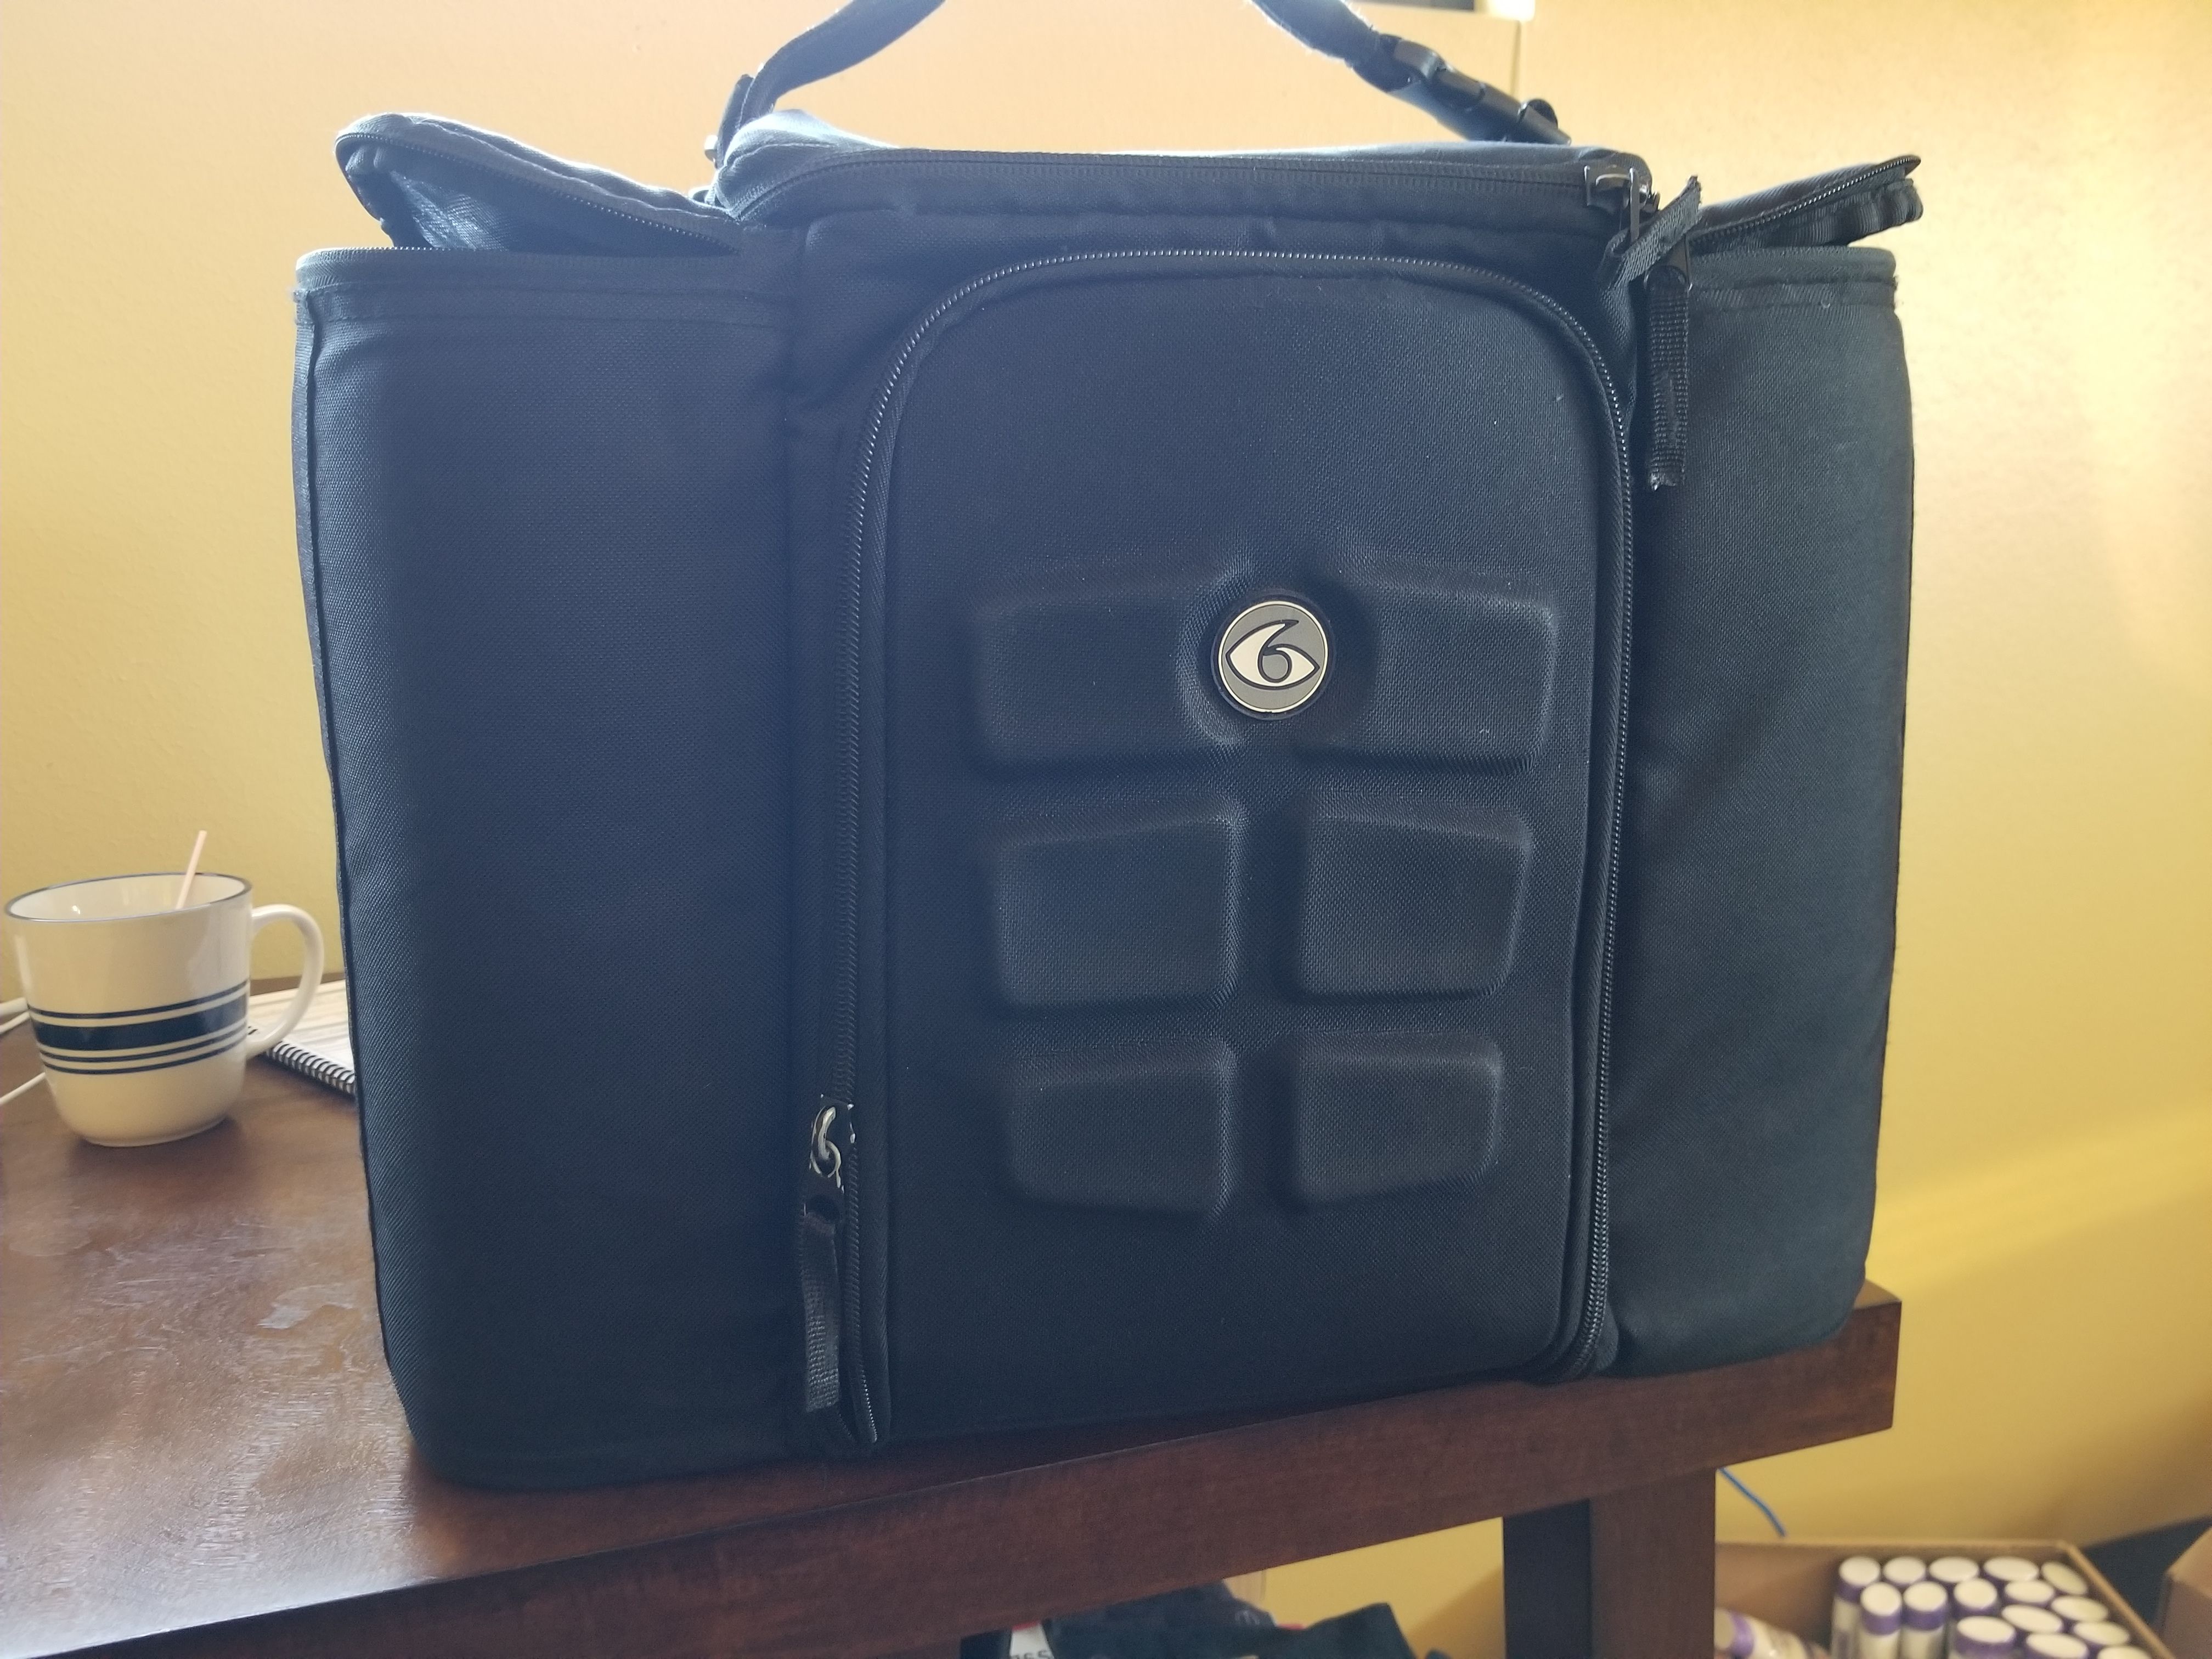 6 Pack Fitness Meal Prep Backpack for Sale in Charlotte, NC - OfferUp